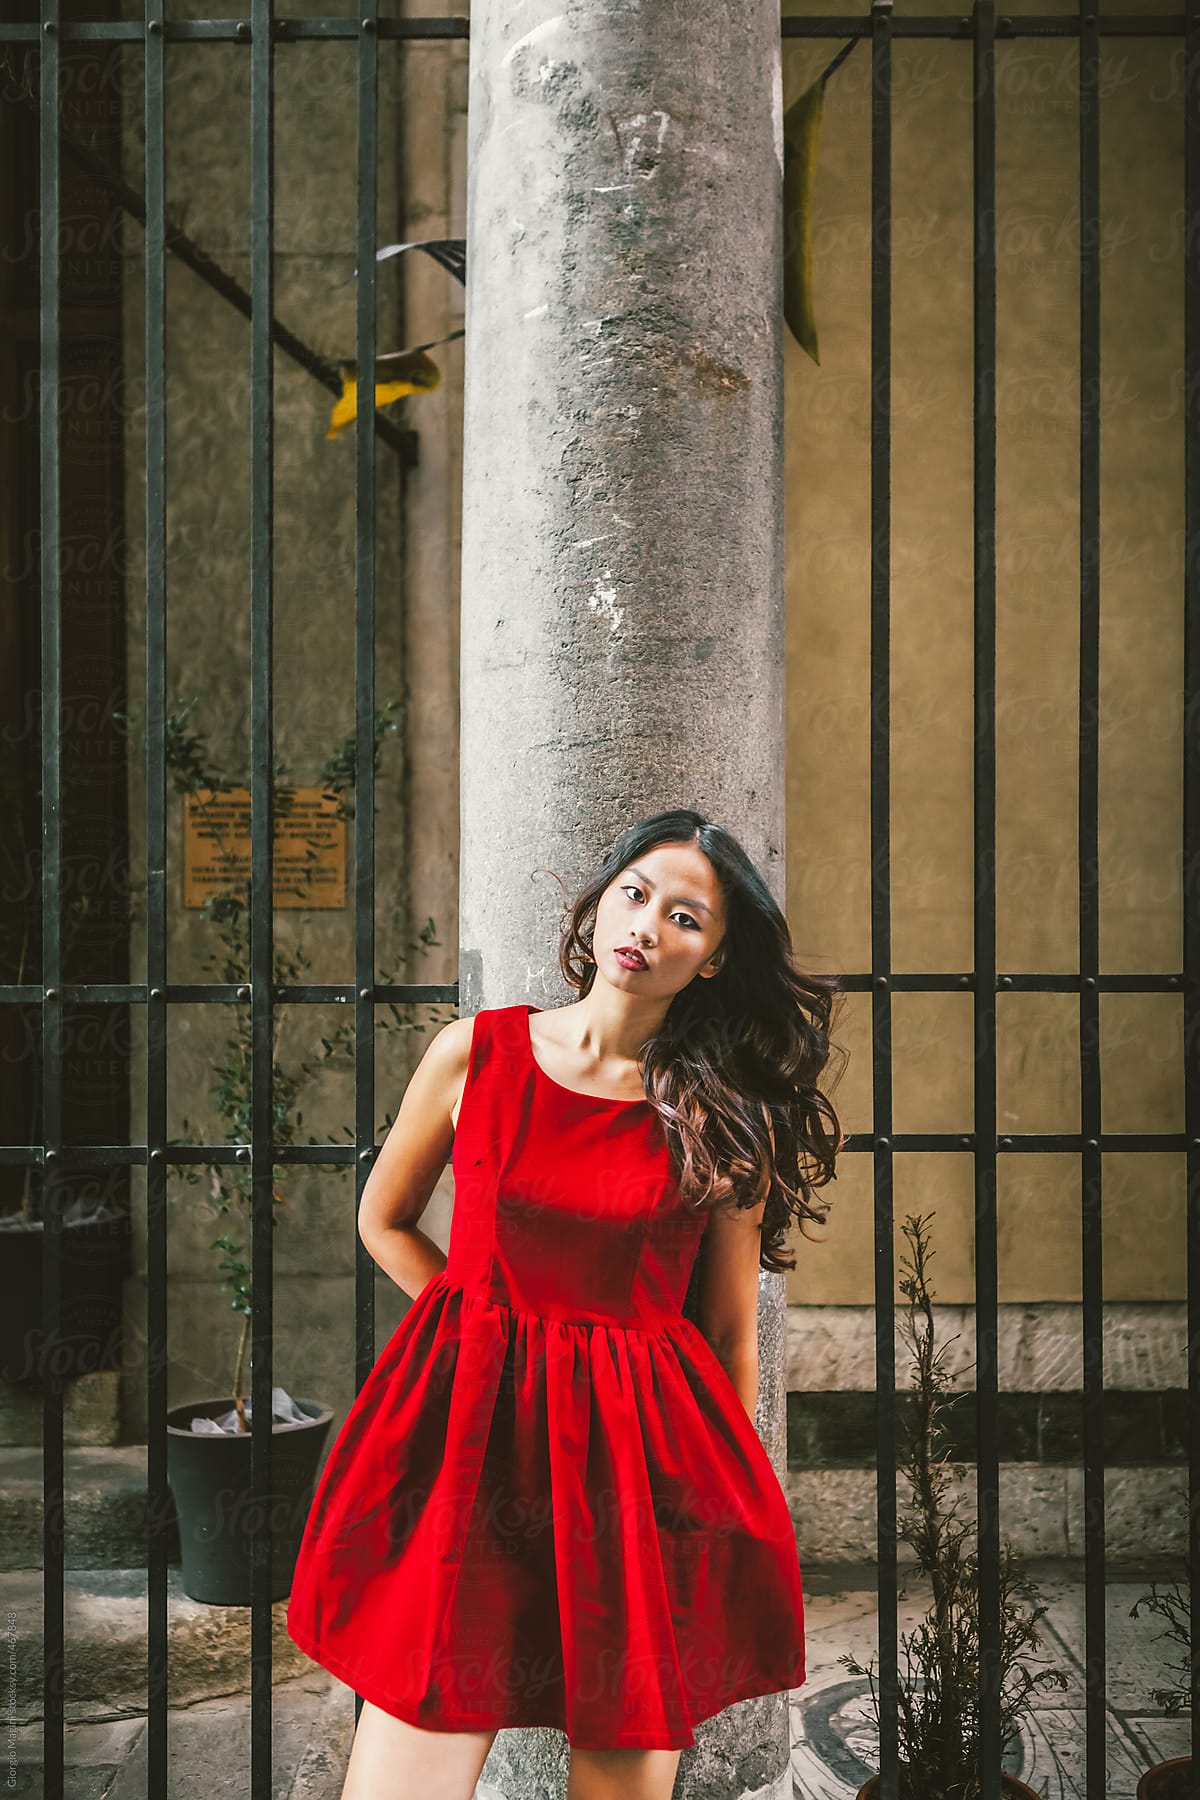 Red Dressed Young Asian Woman against an Old Column